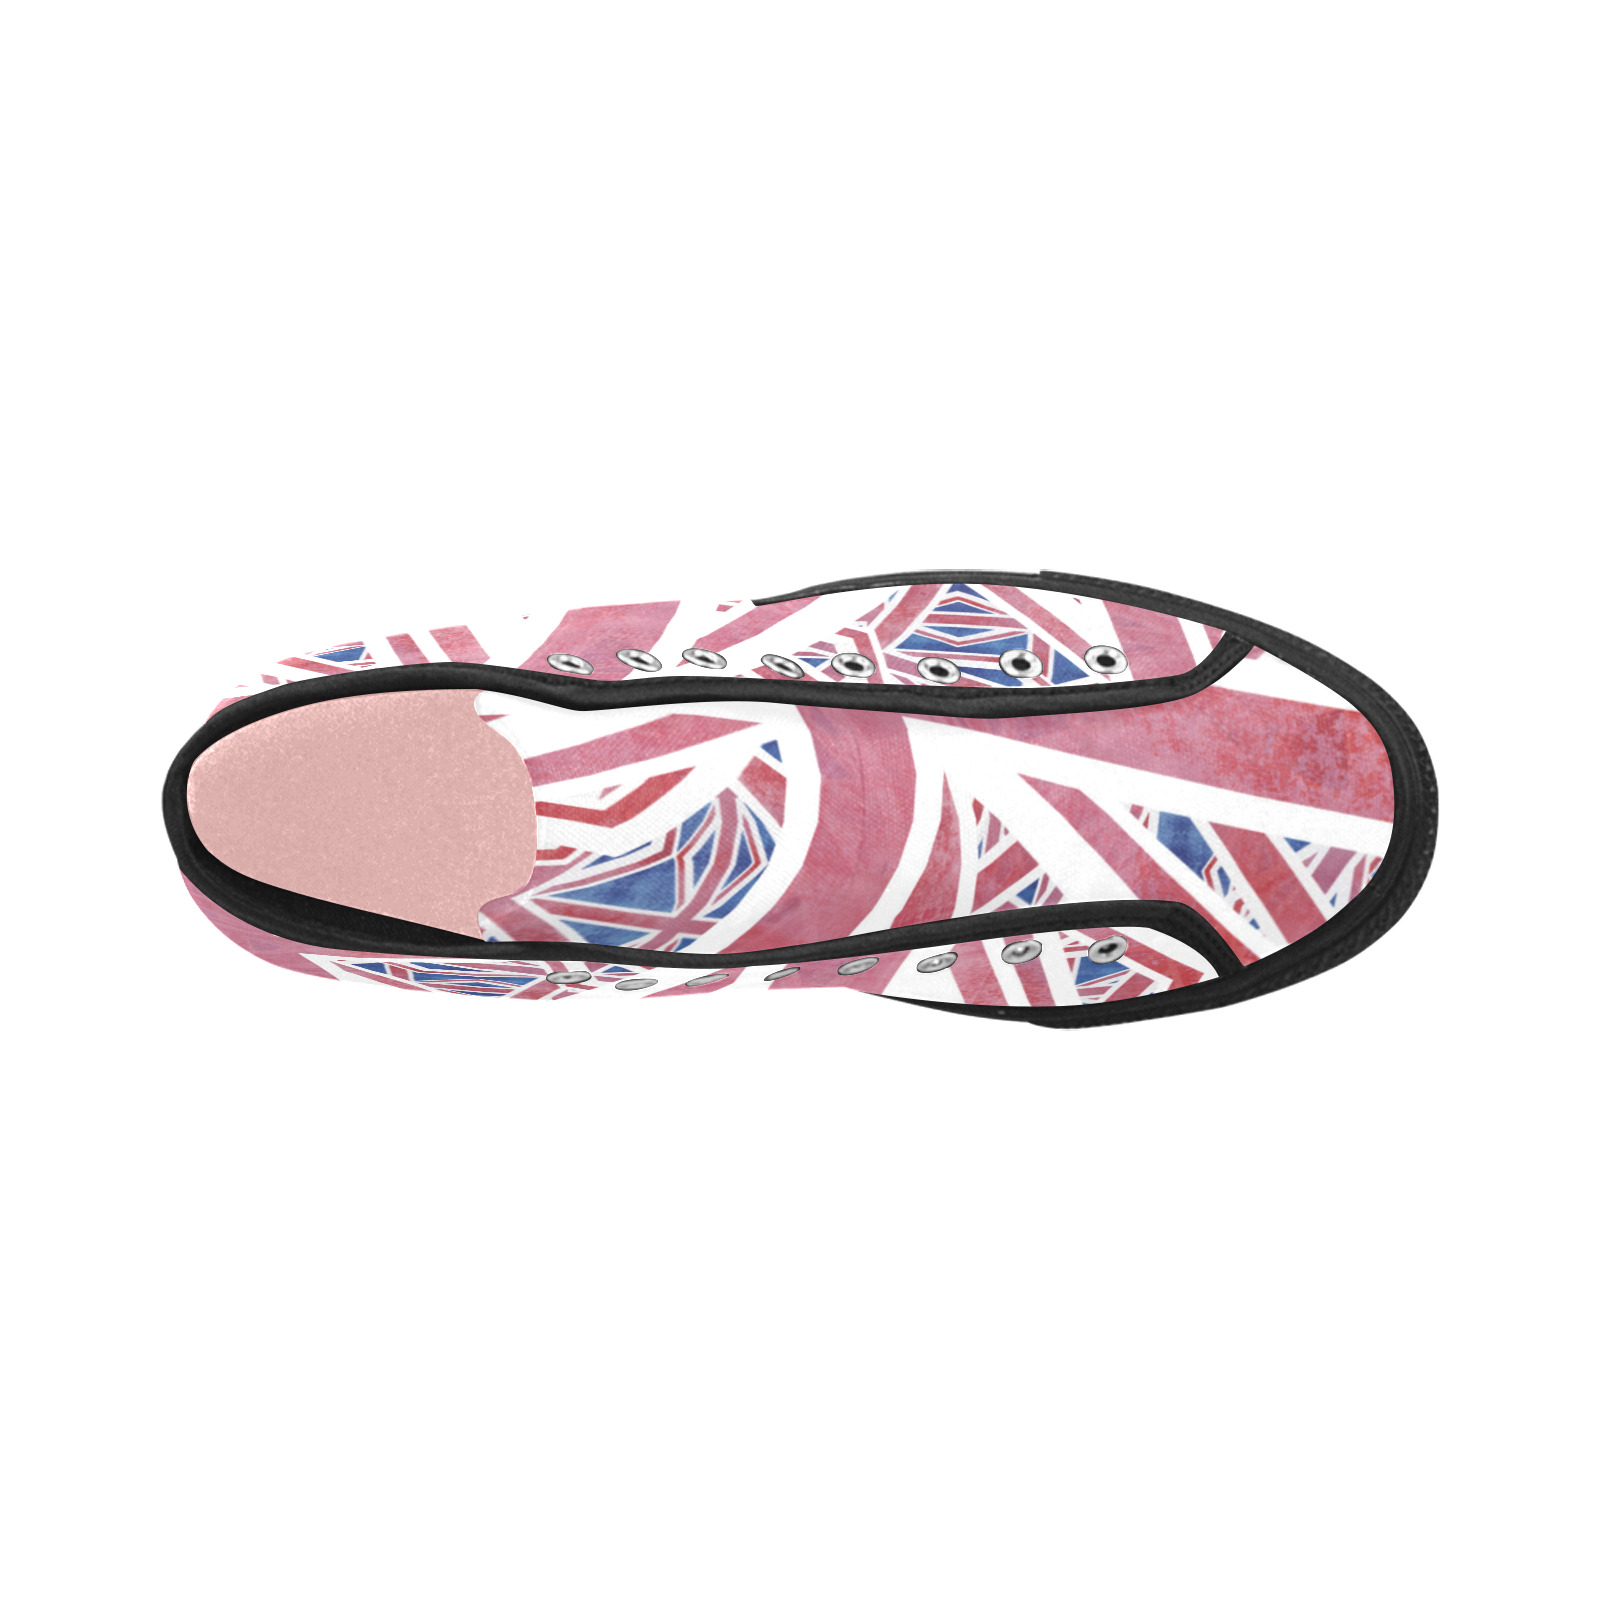 Abstract Union Jack British Flag Collage Vancouver H Women's Canvas Shoes (1013-1)